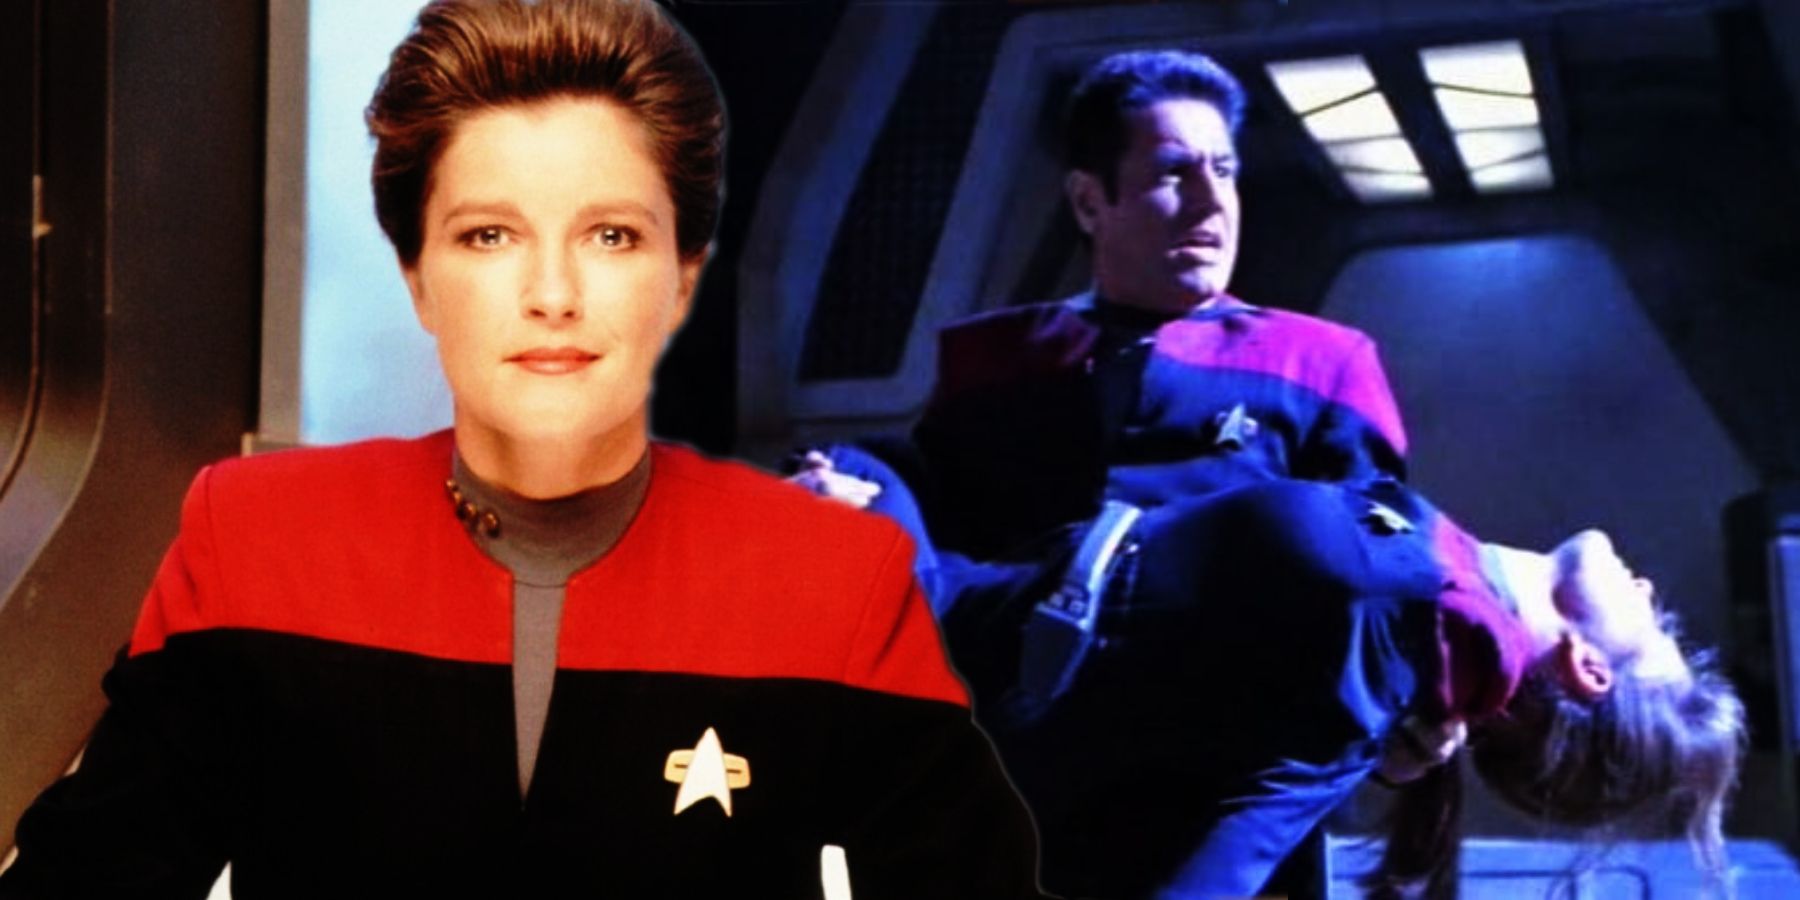 Janeway dies in the arms of Chakotay in Coda